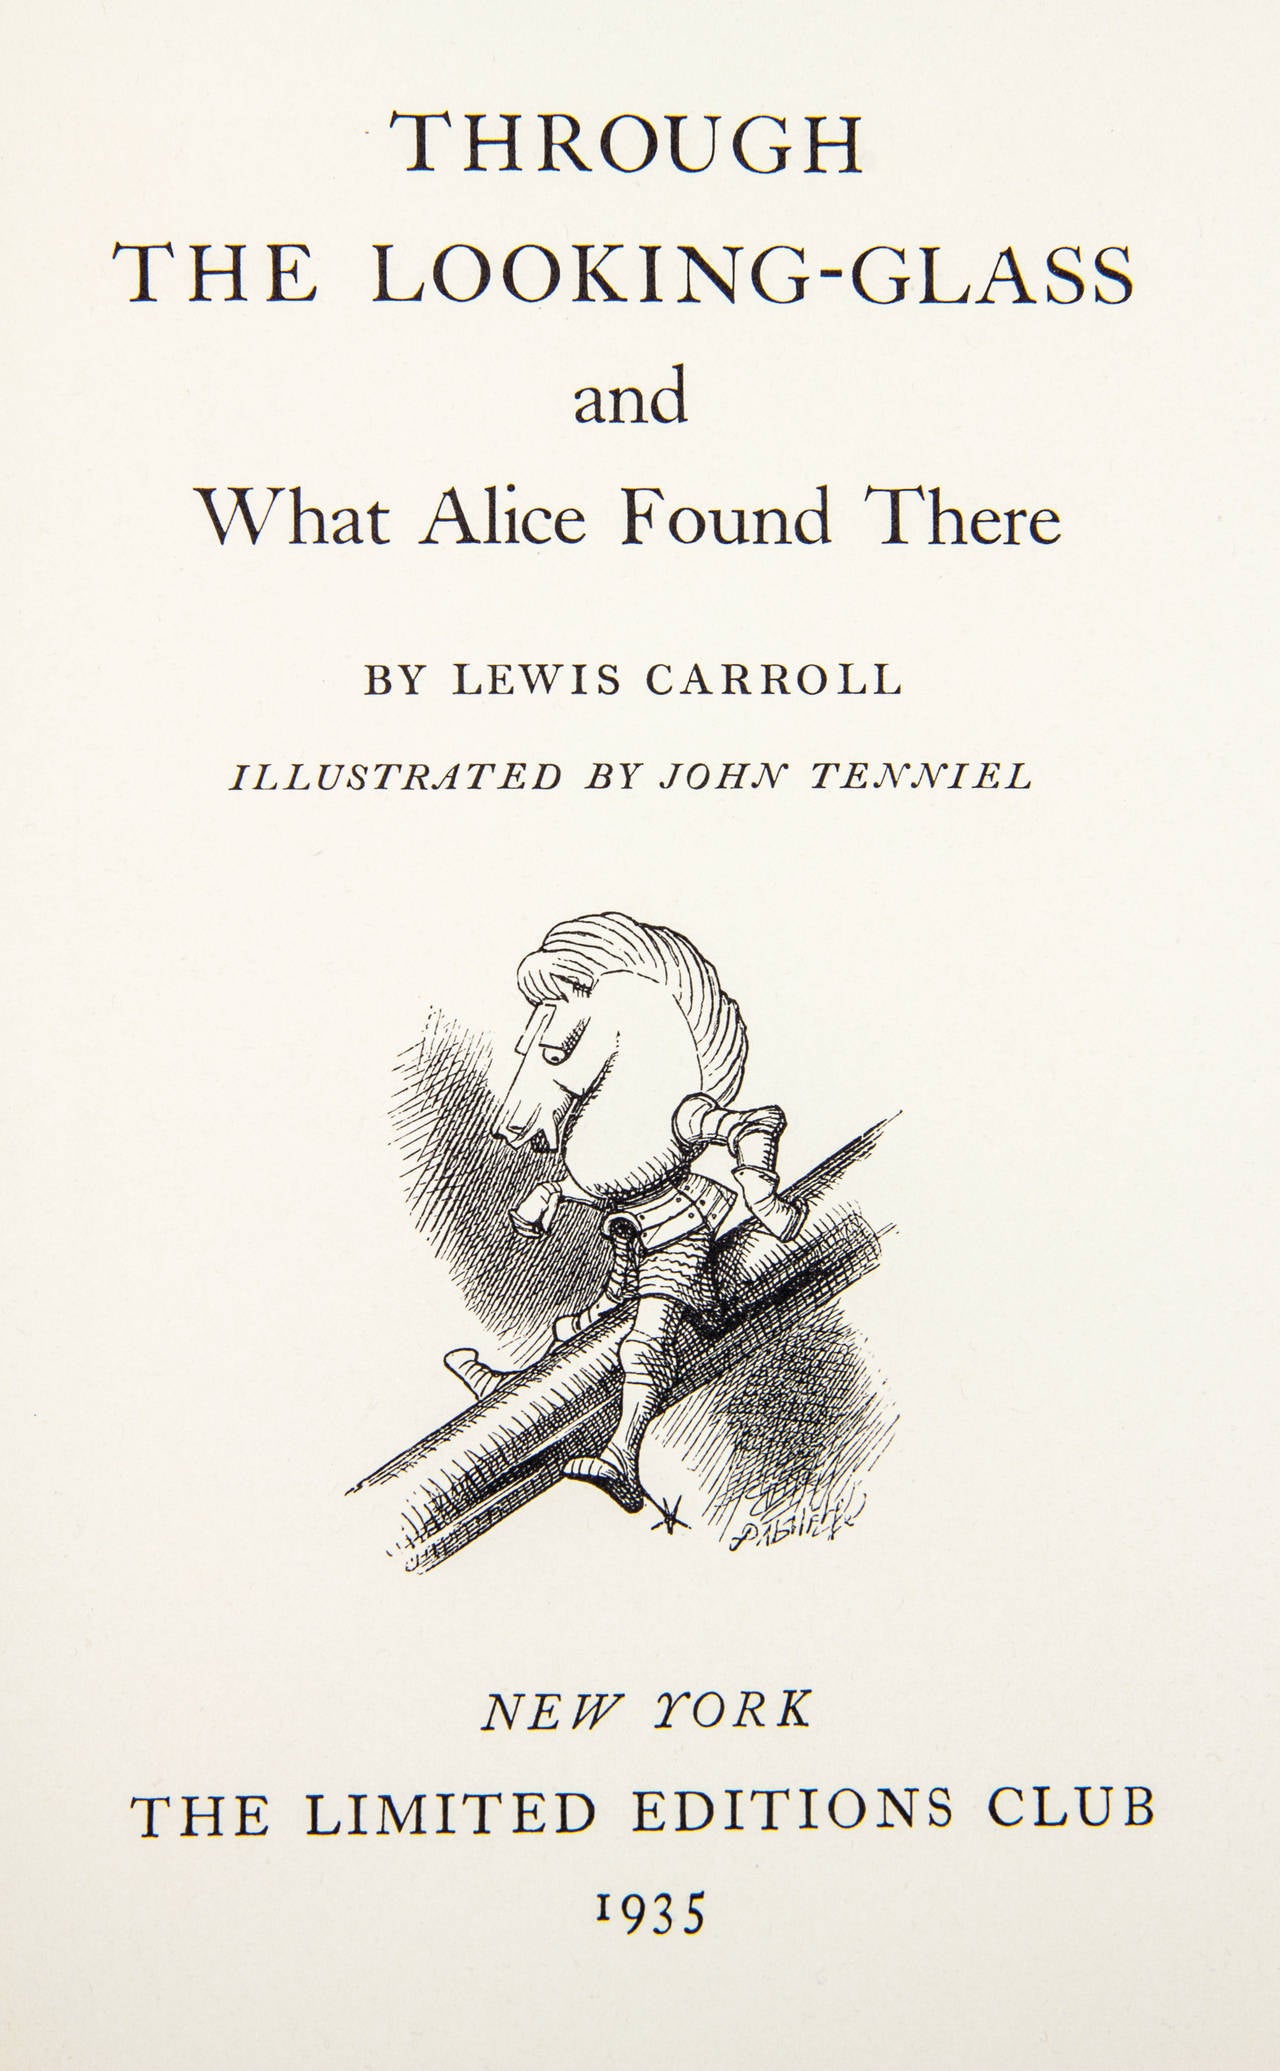 Alice's adventures in Wonderland and Through the Looking Glass by Lewis Carroll. Two volumes. [4], xi, [3], 182, [4]; xxii, [8], 211, [5] pp. With illustrations by John Tenniel. 8vo., each volume bound in recent full red and blue respective morocco